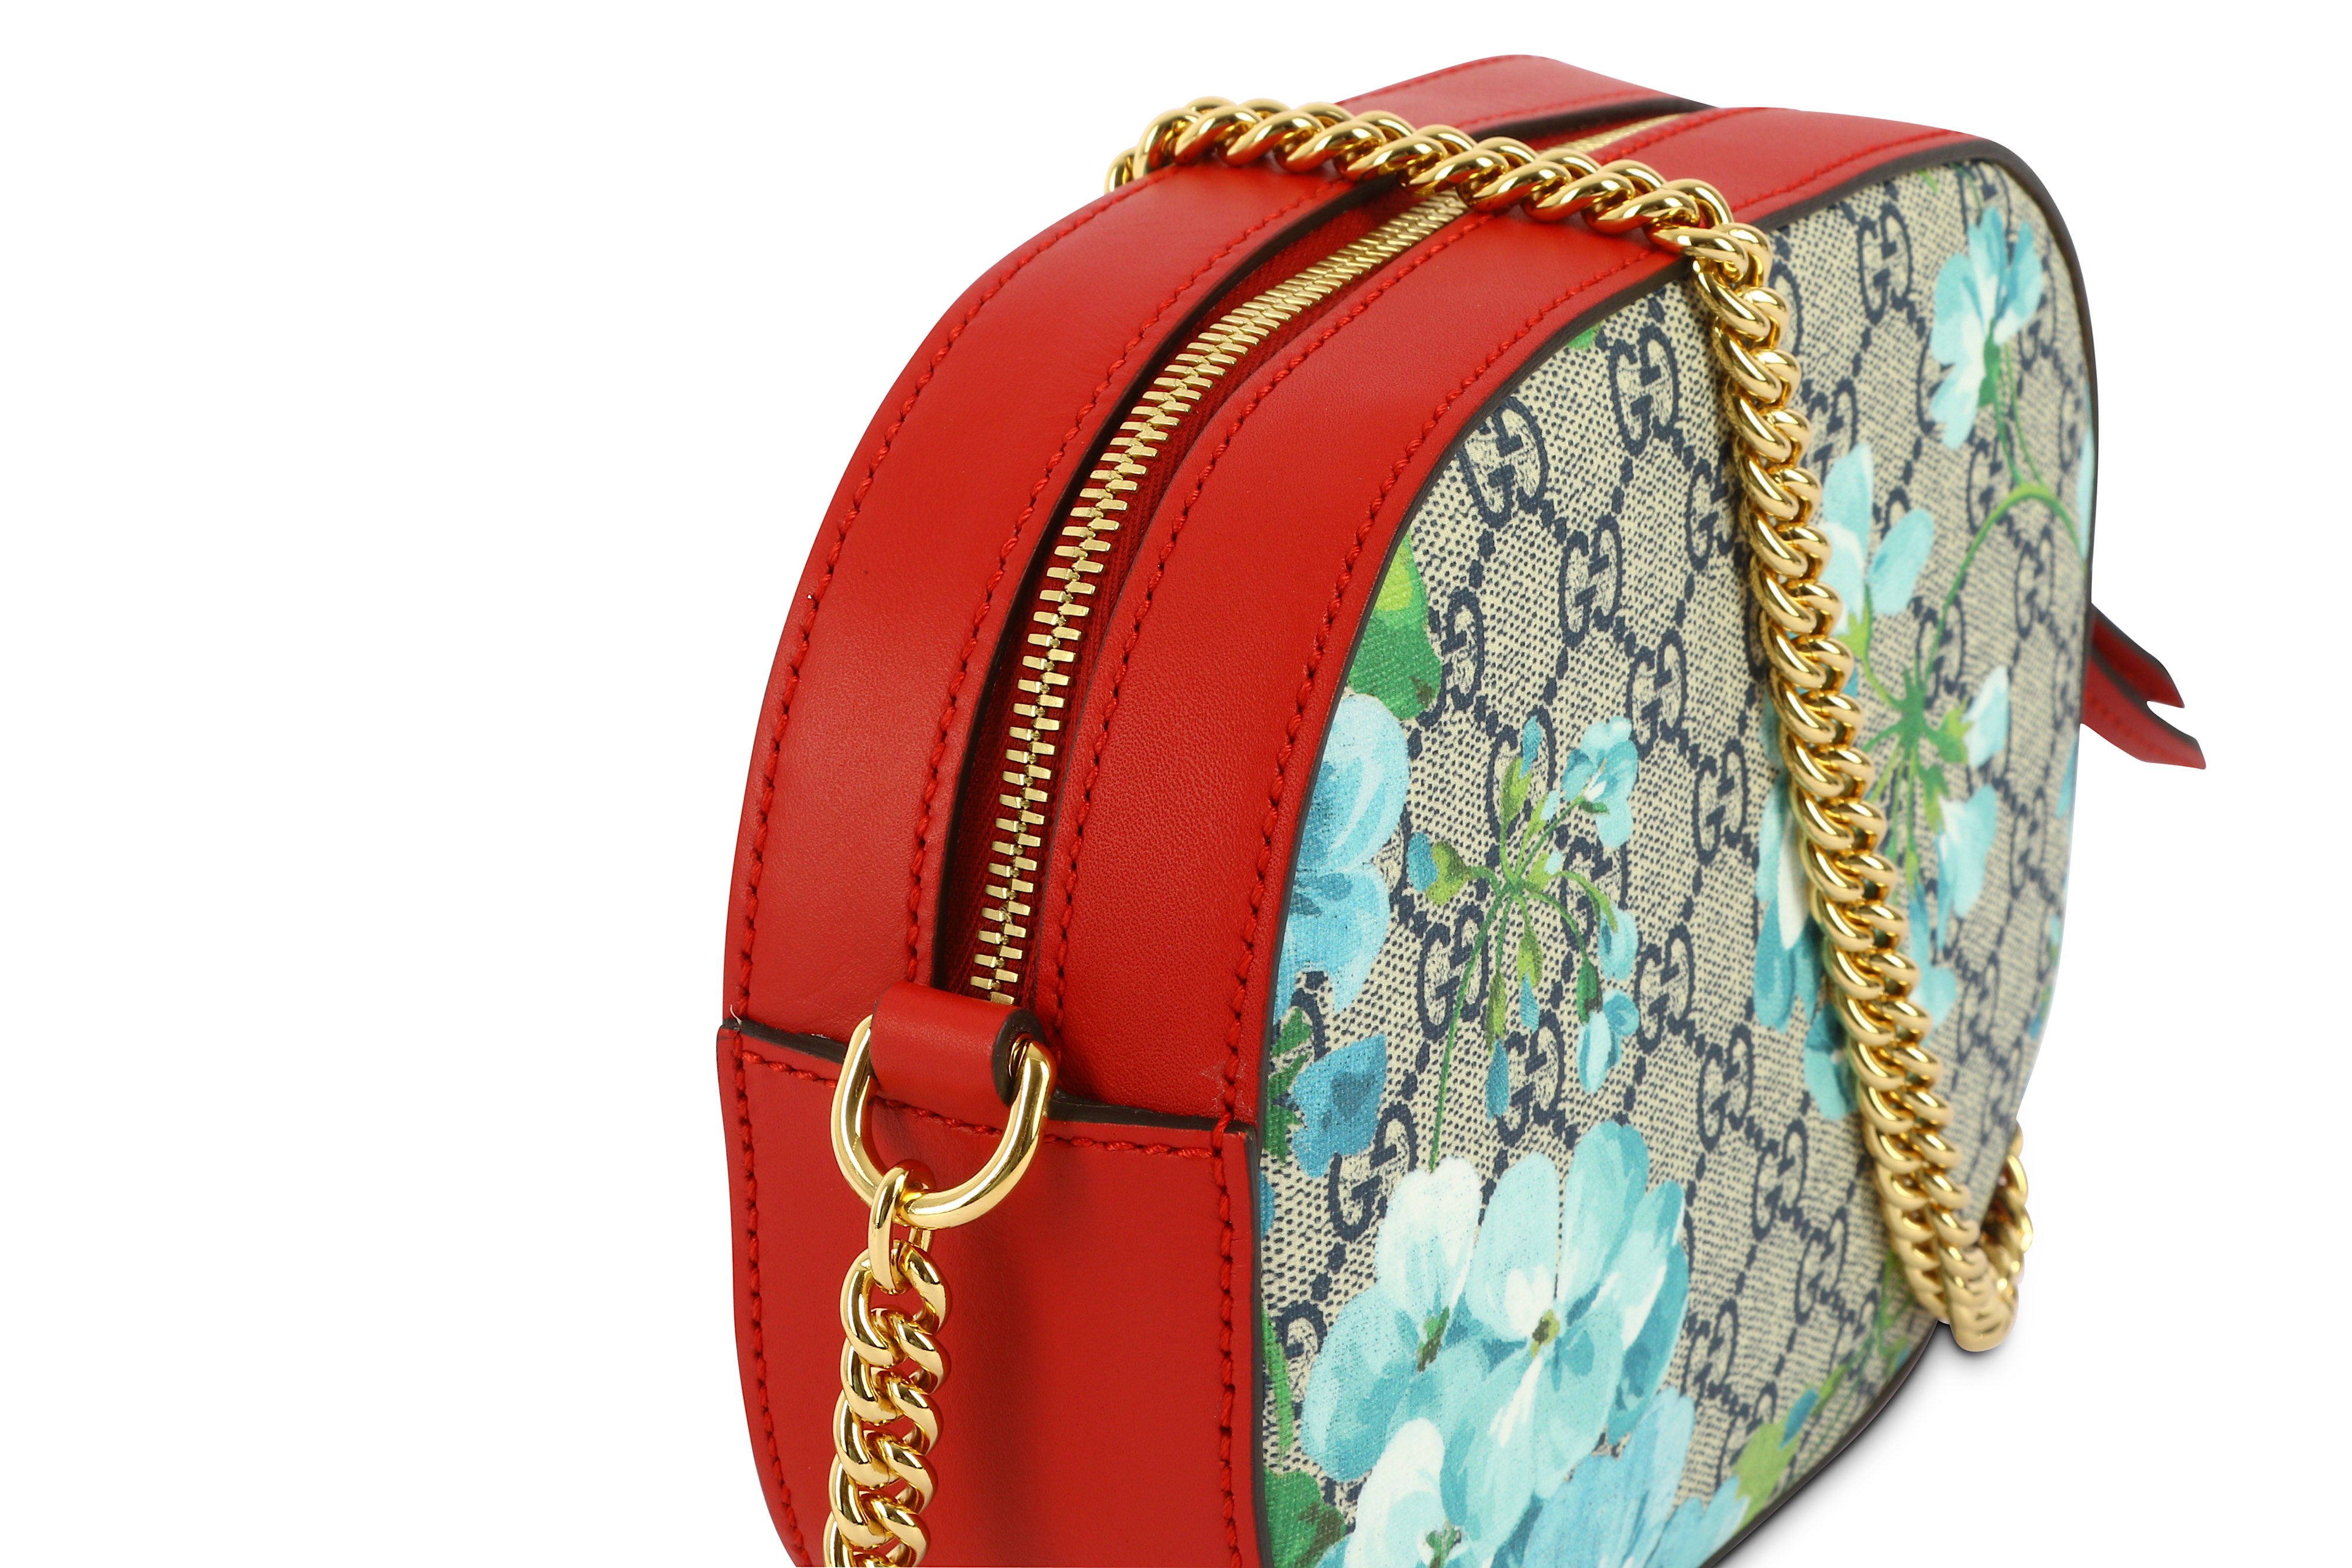 Gucci GG Supreme Blooms Crossbody - Image 5 of 7